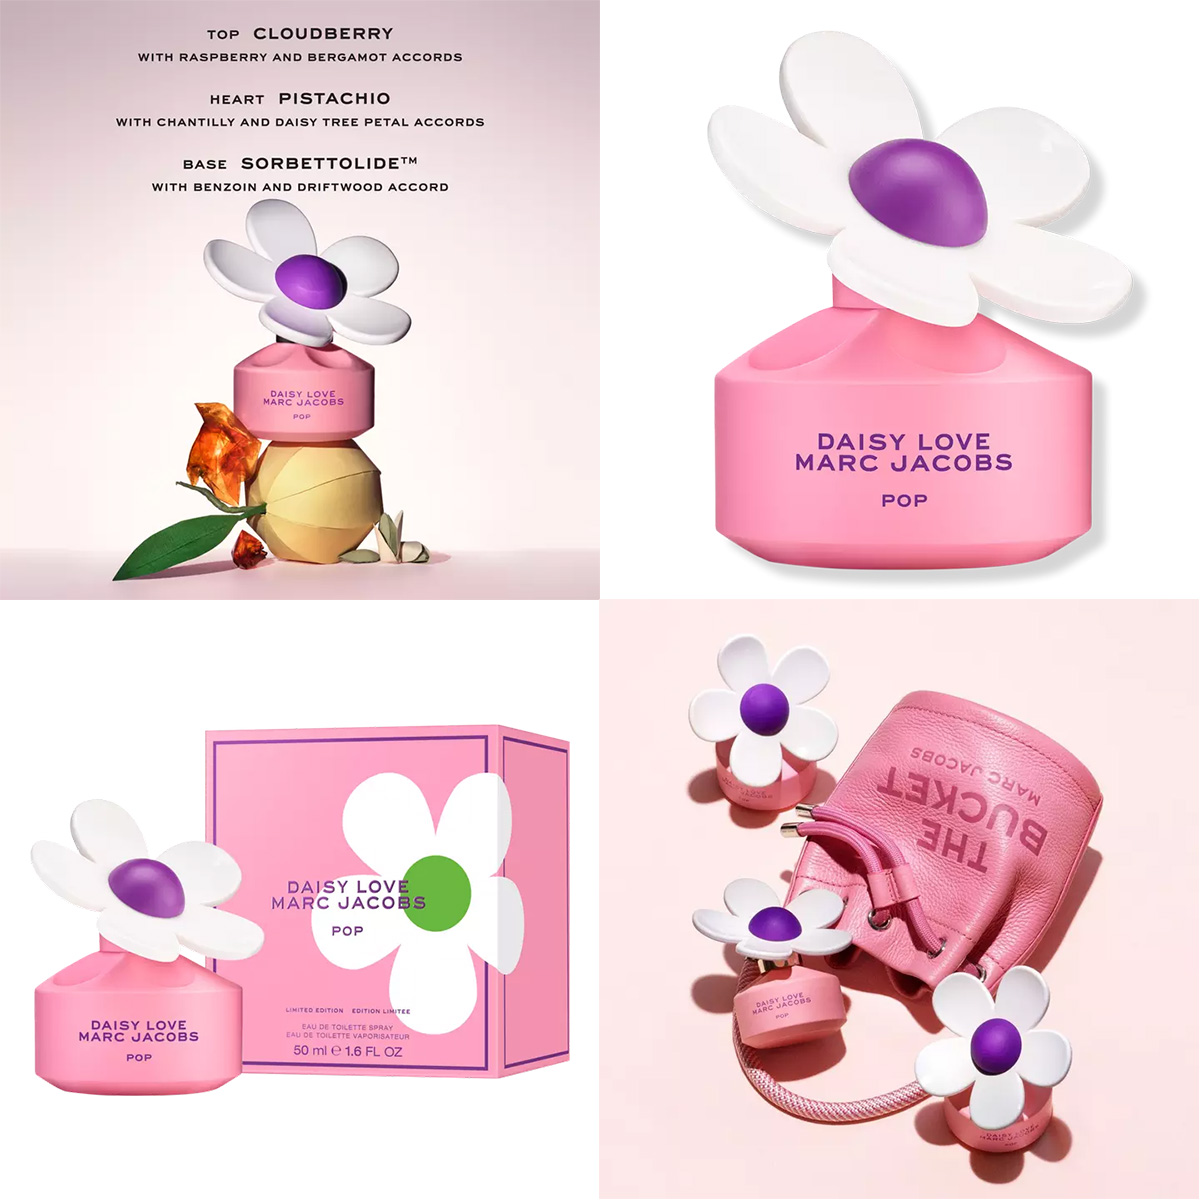 Marc Jacobs Daisy Love Pop perfume bottle, packaging, and fragrance ads